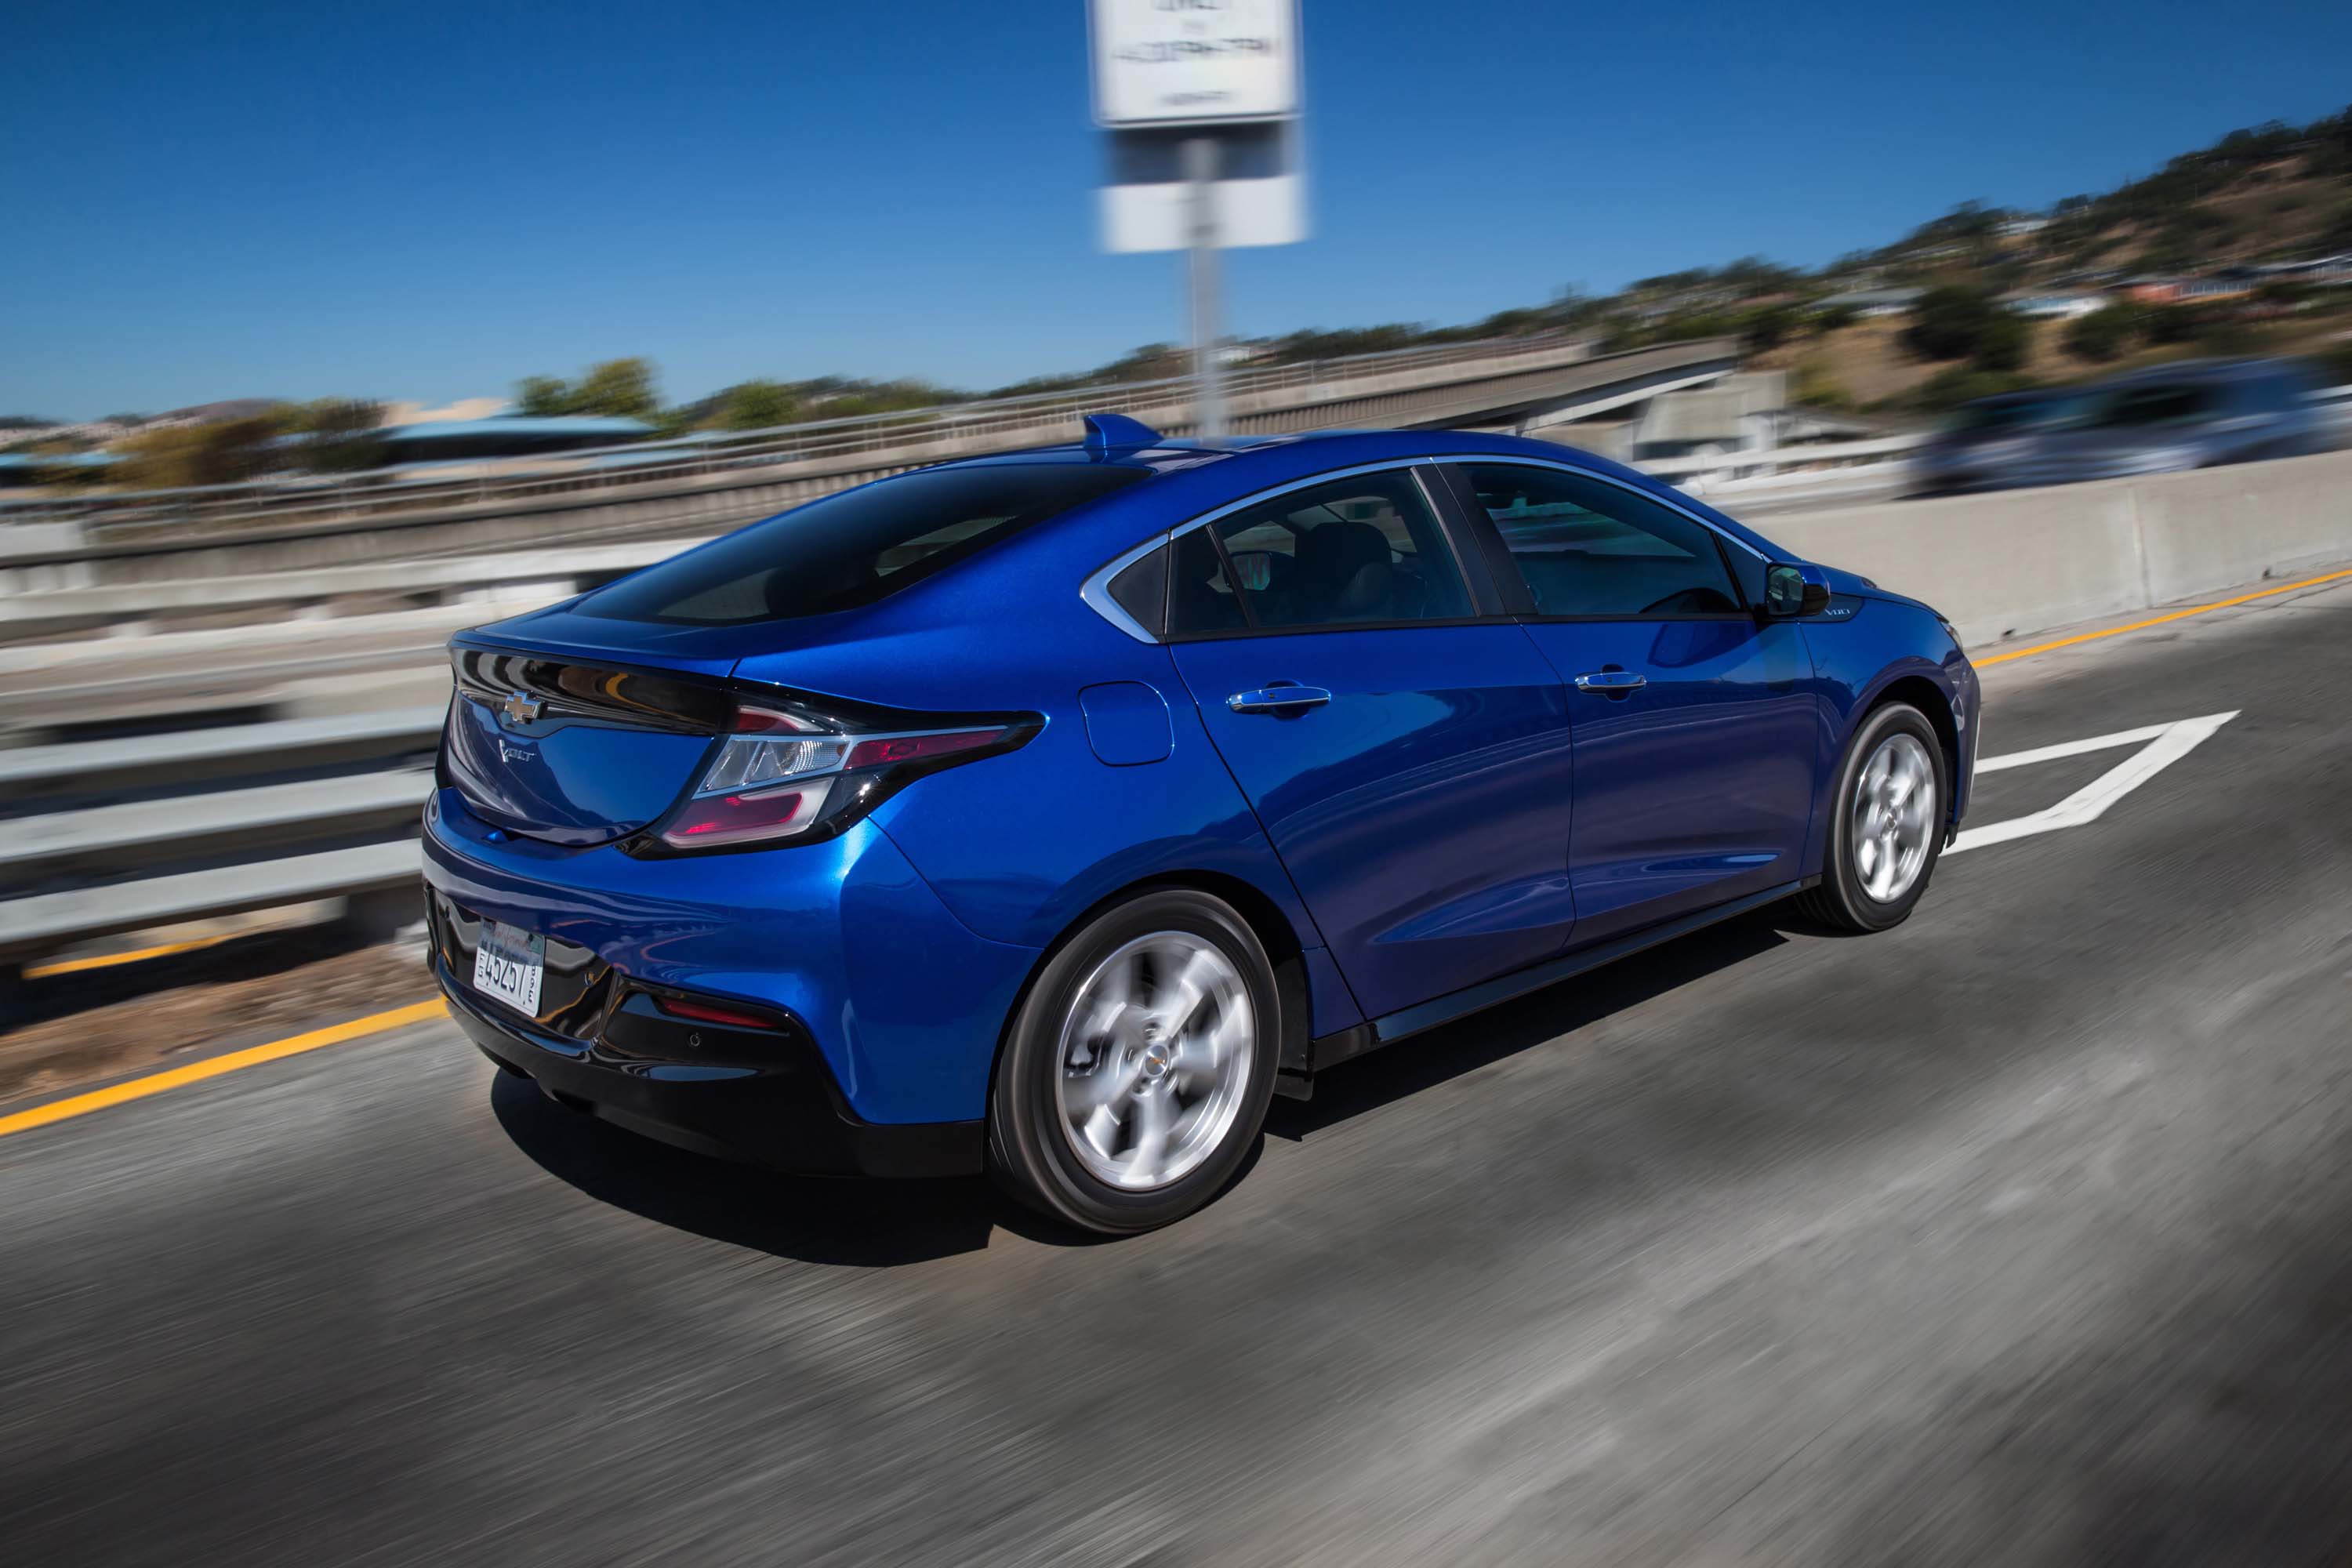 What will happen to GM's Voltec system now that the Chevy Volt has been